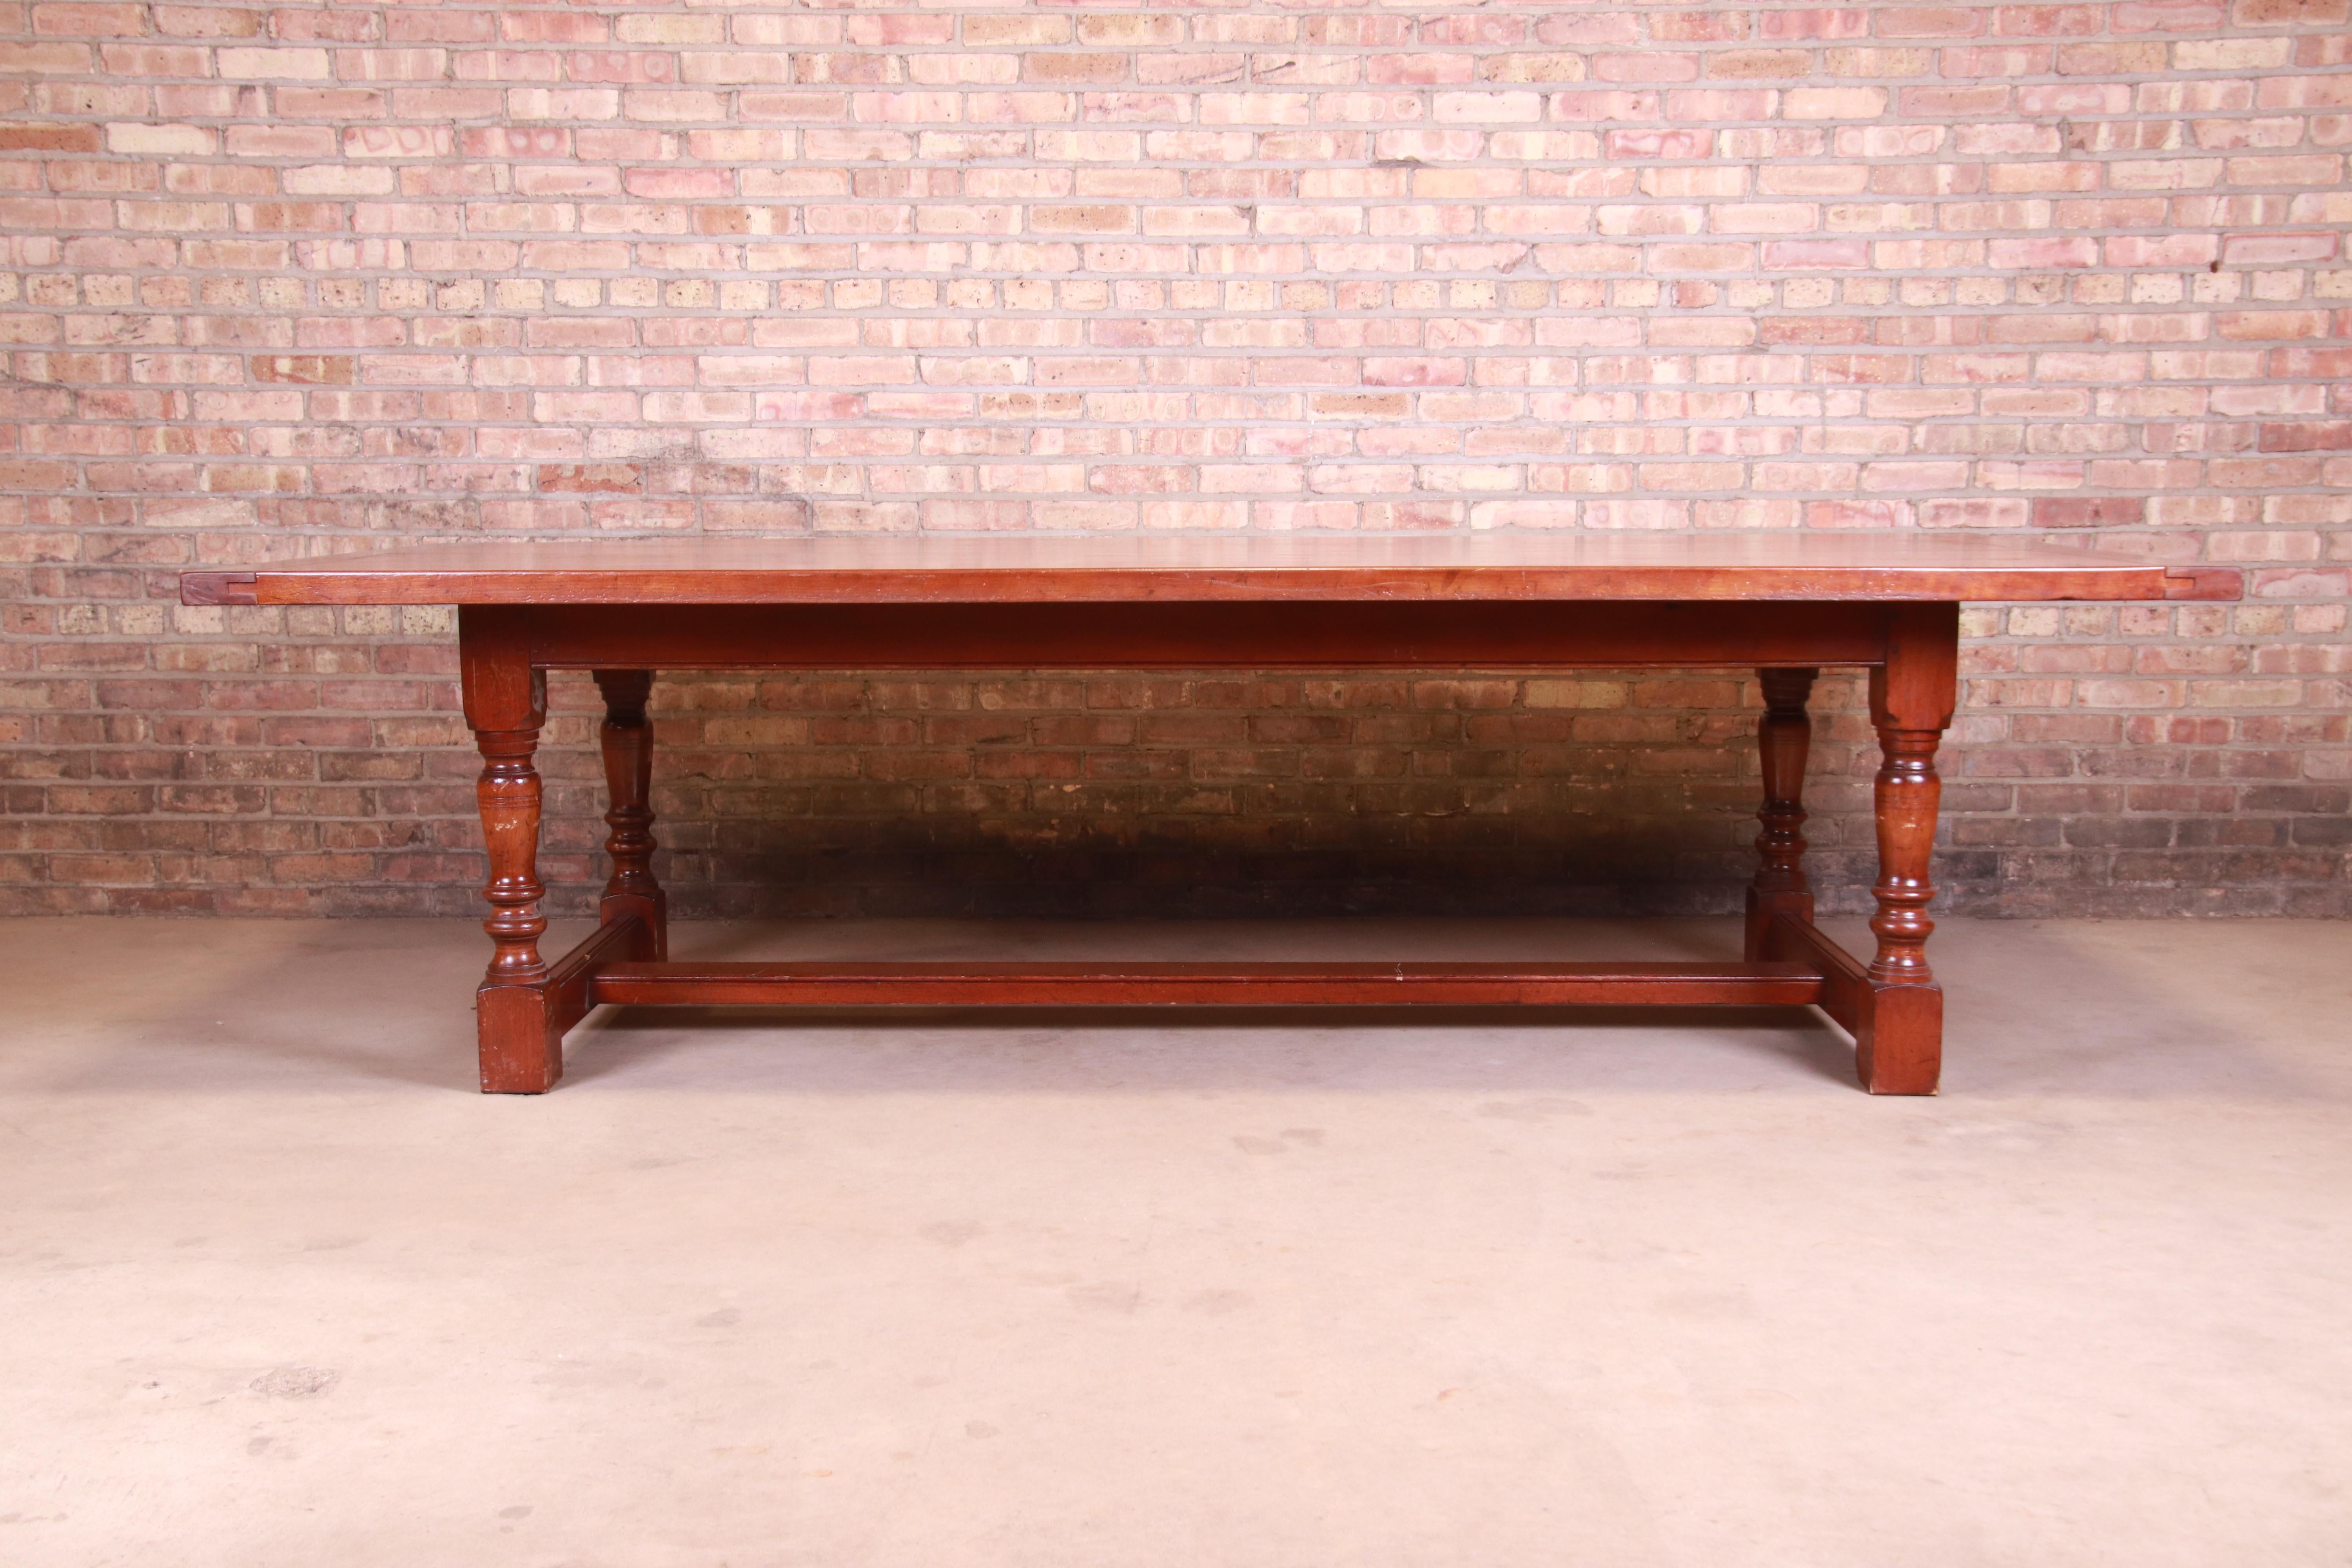 A gorgeous antique harvest farmhouse refectory dining table

England, Circa 1890

Solid cherry wood, with turned legs and trestle style base.

Measures: 107.5